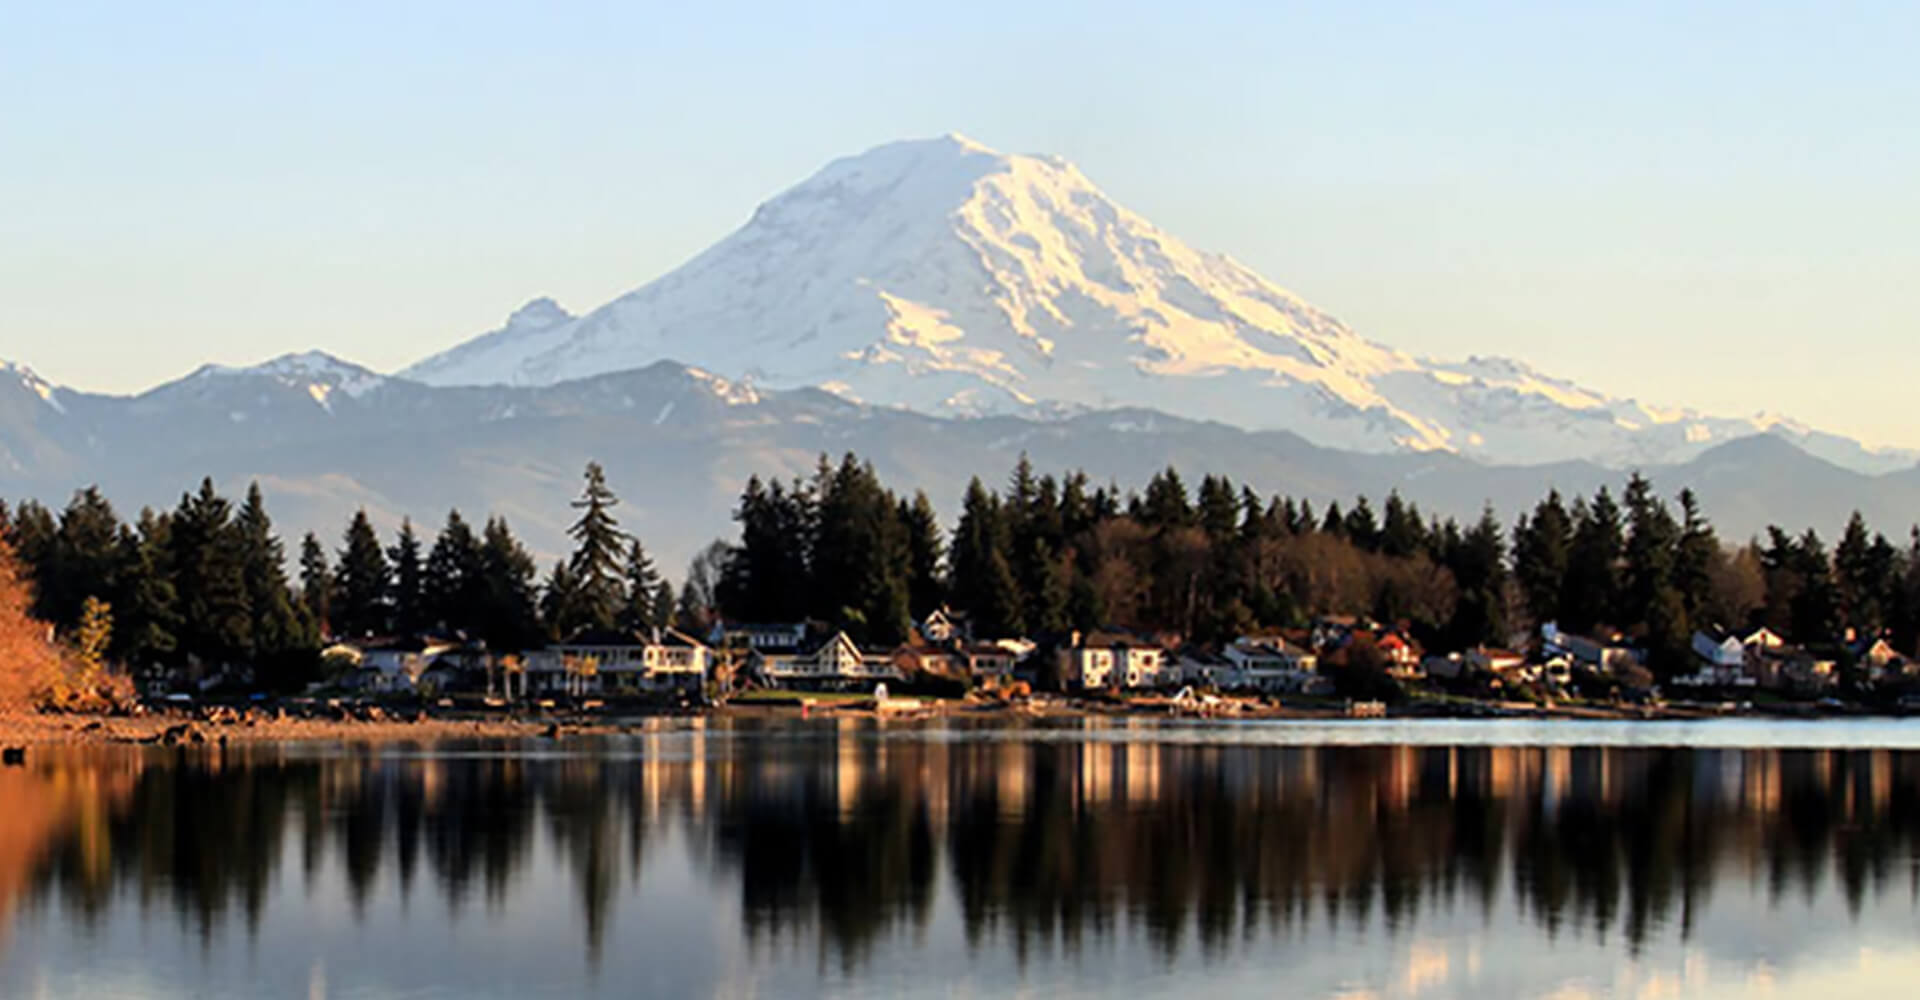 Bonney Lake with Mt. Rainier in the background